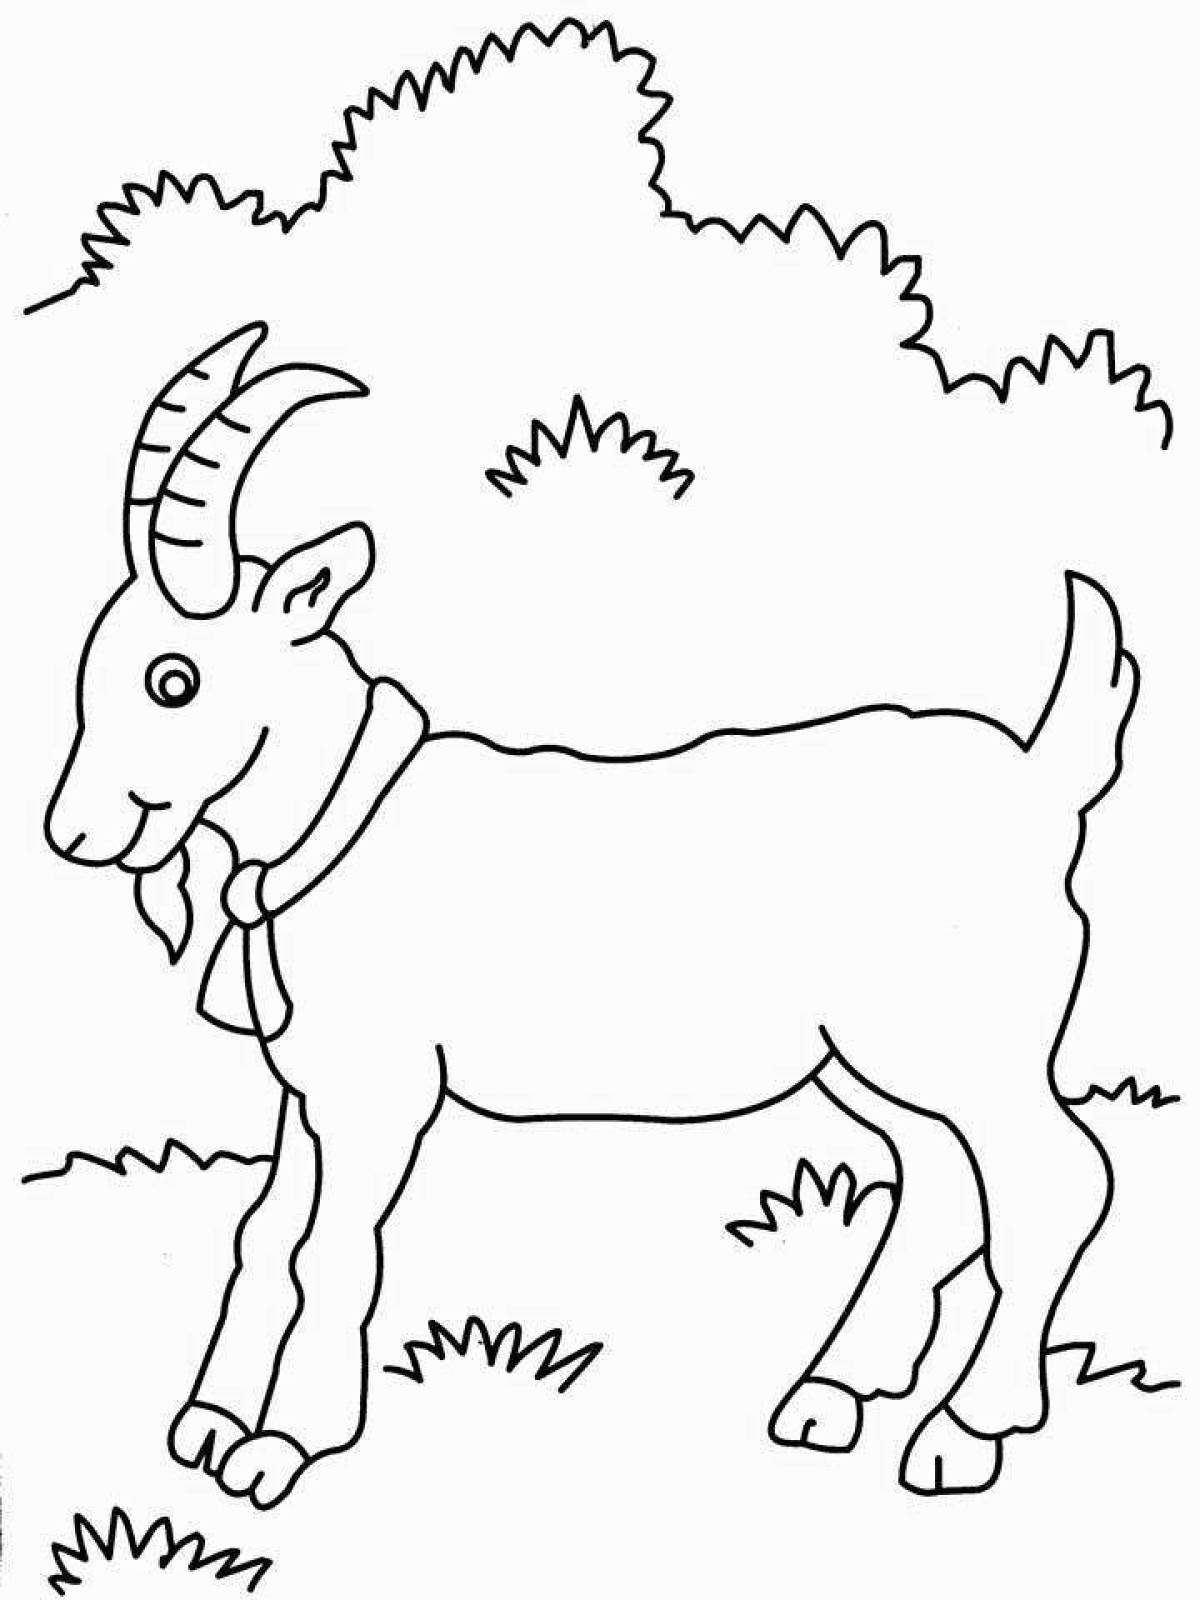 Fun coloring pages of pets for children 2-3 years old